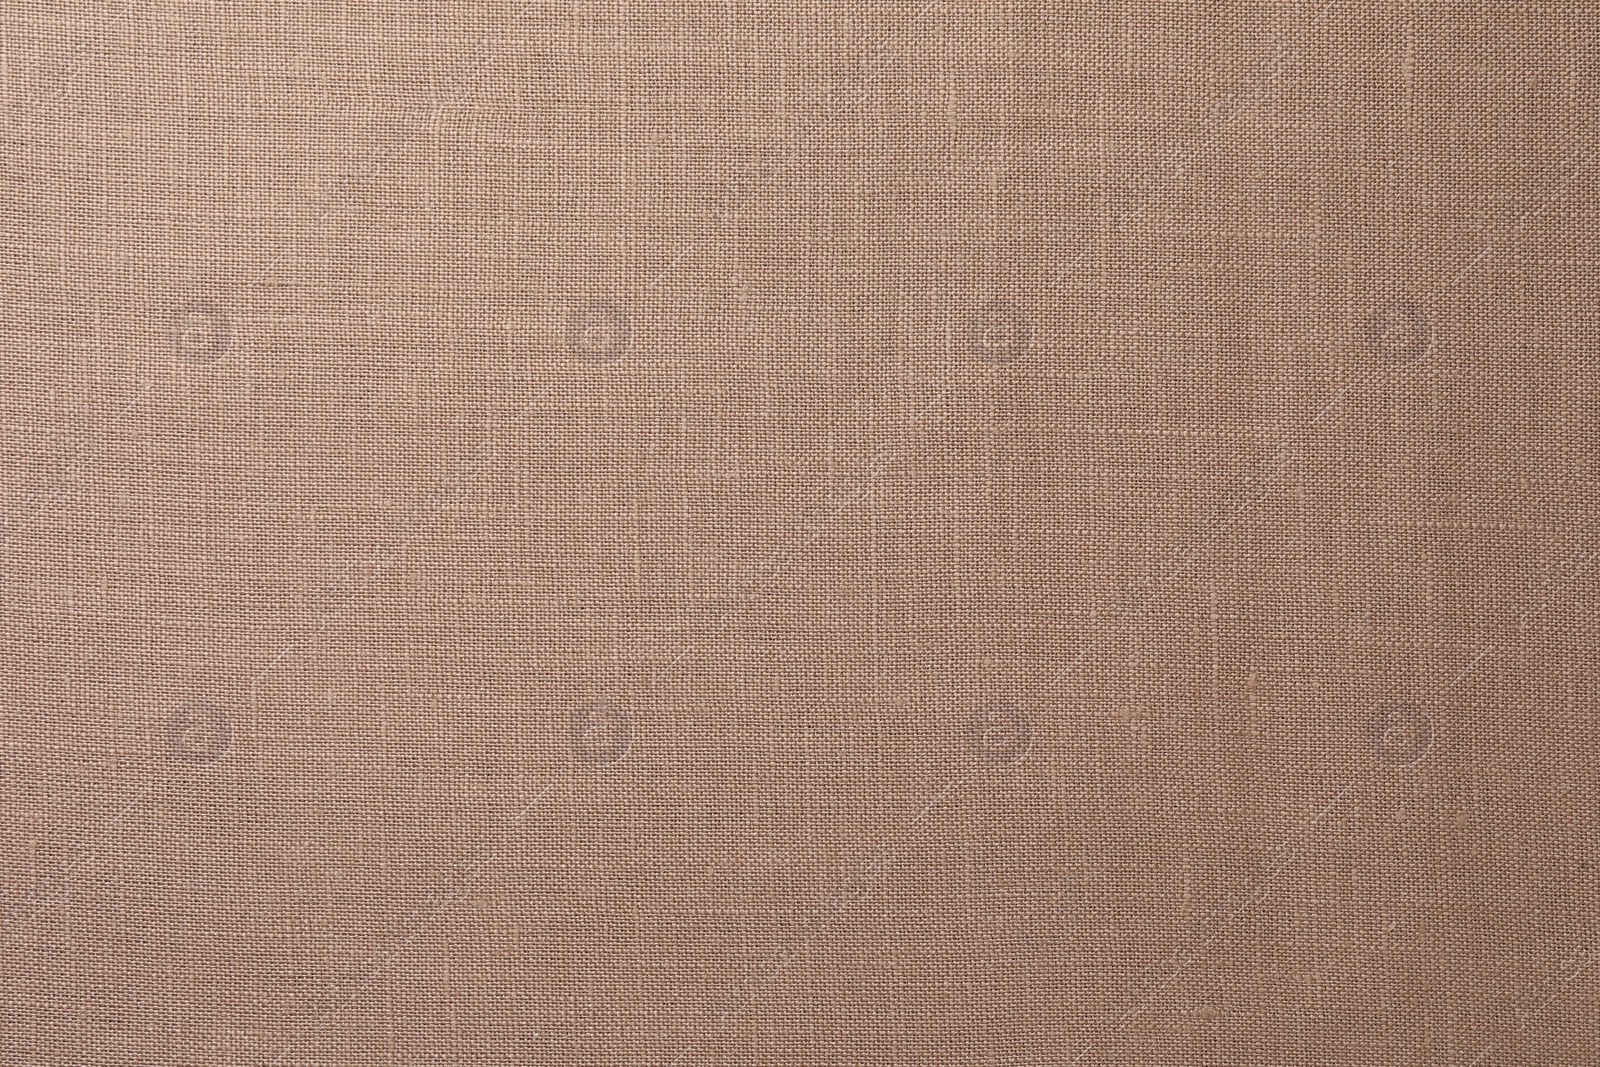 Photo of Texture of brown fabric as background, top view